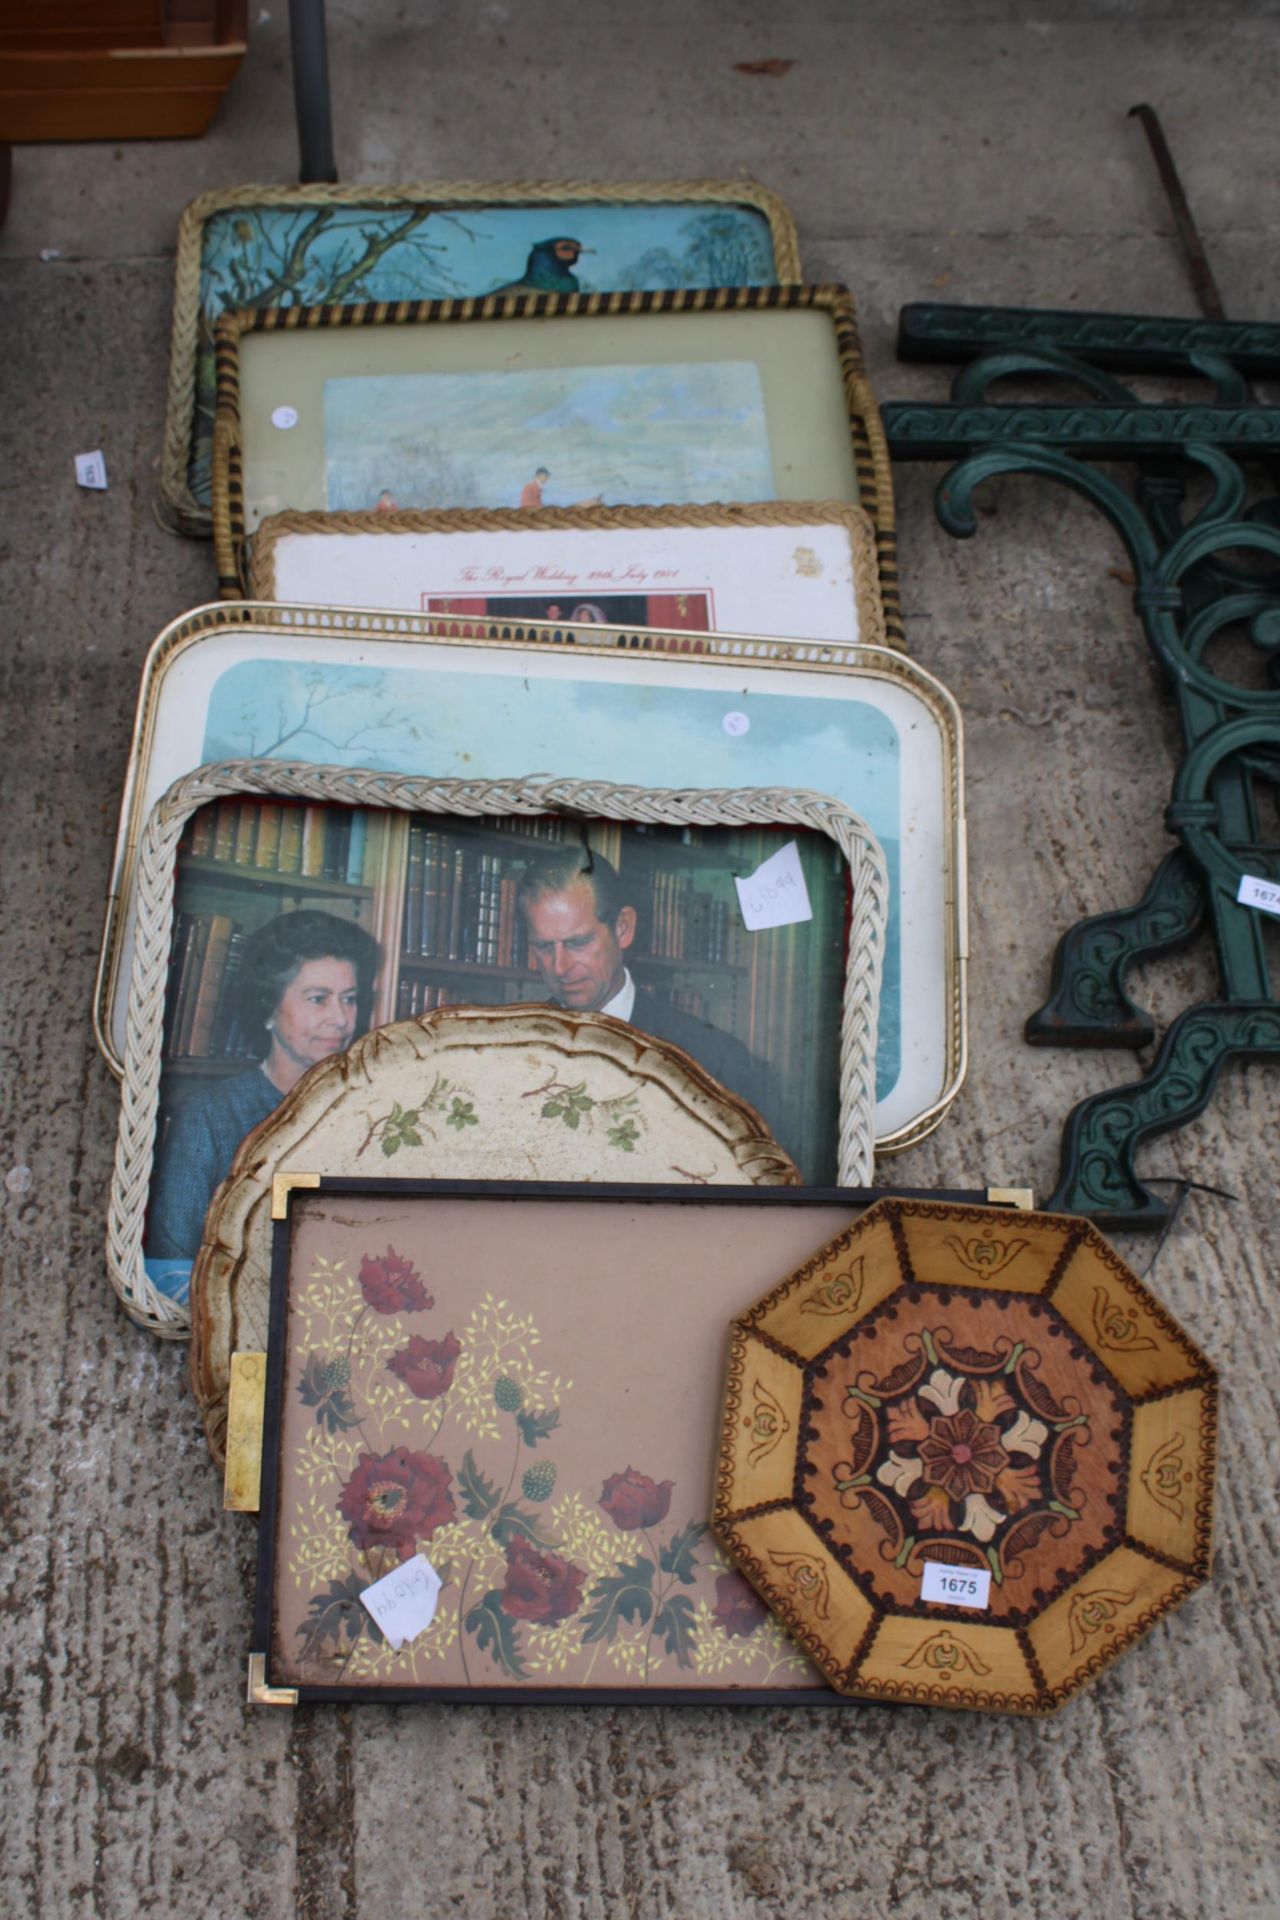 AN ASSORTMENT OF VARIOUS VINTAGE AND RETRO SERVING TRAYS